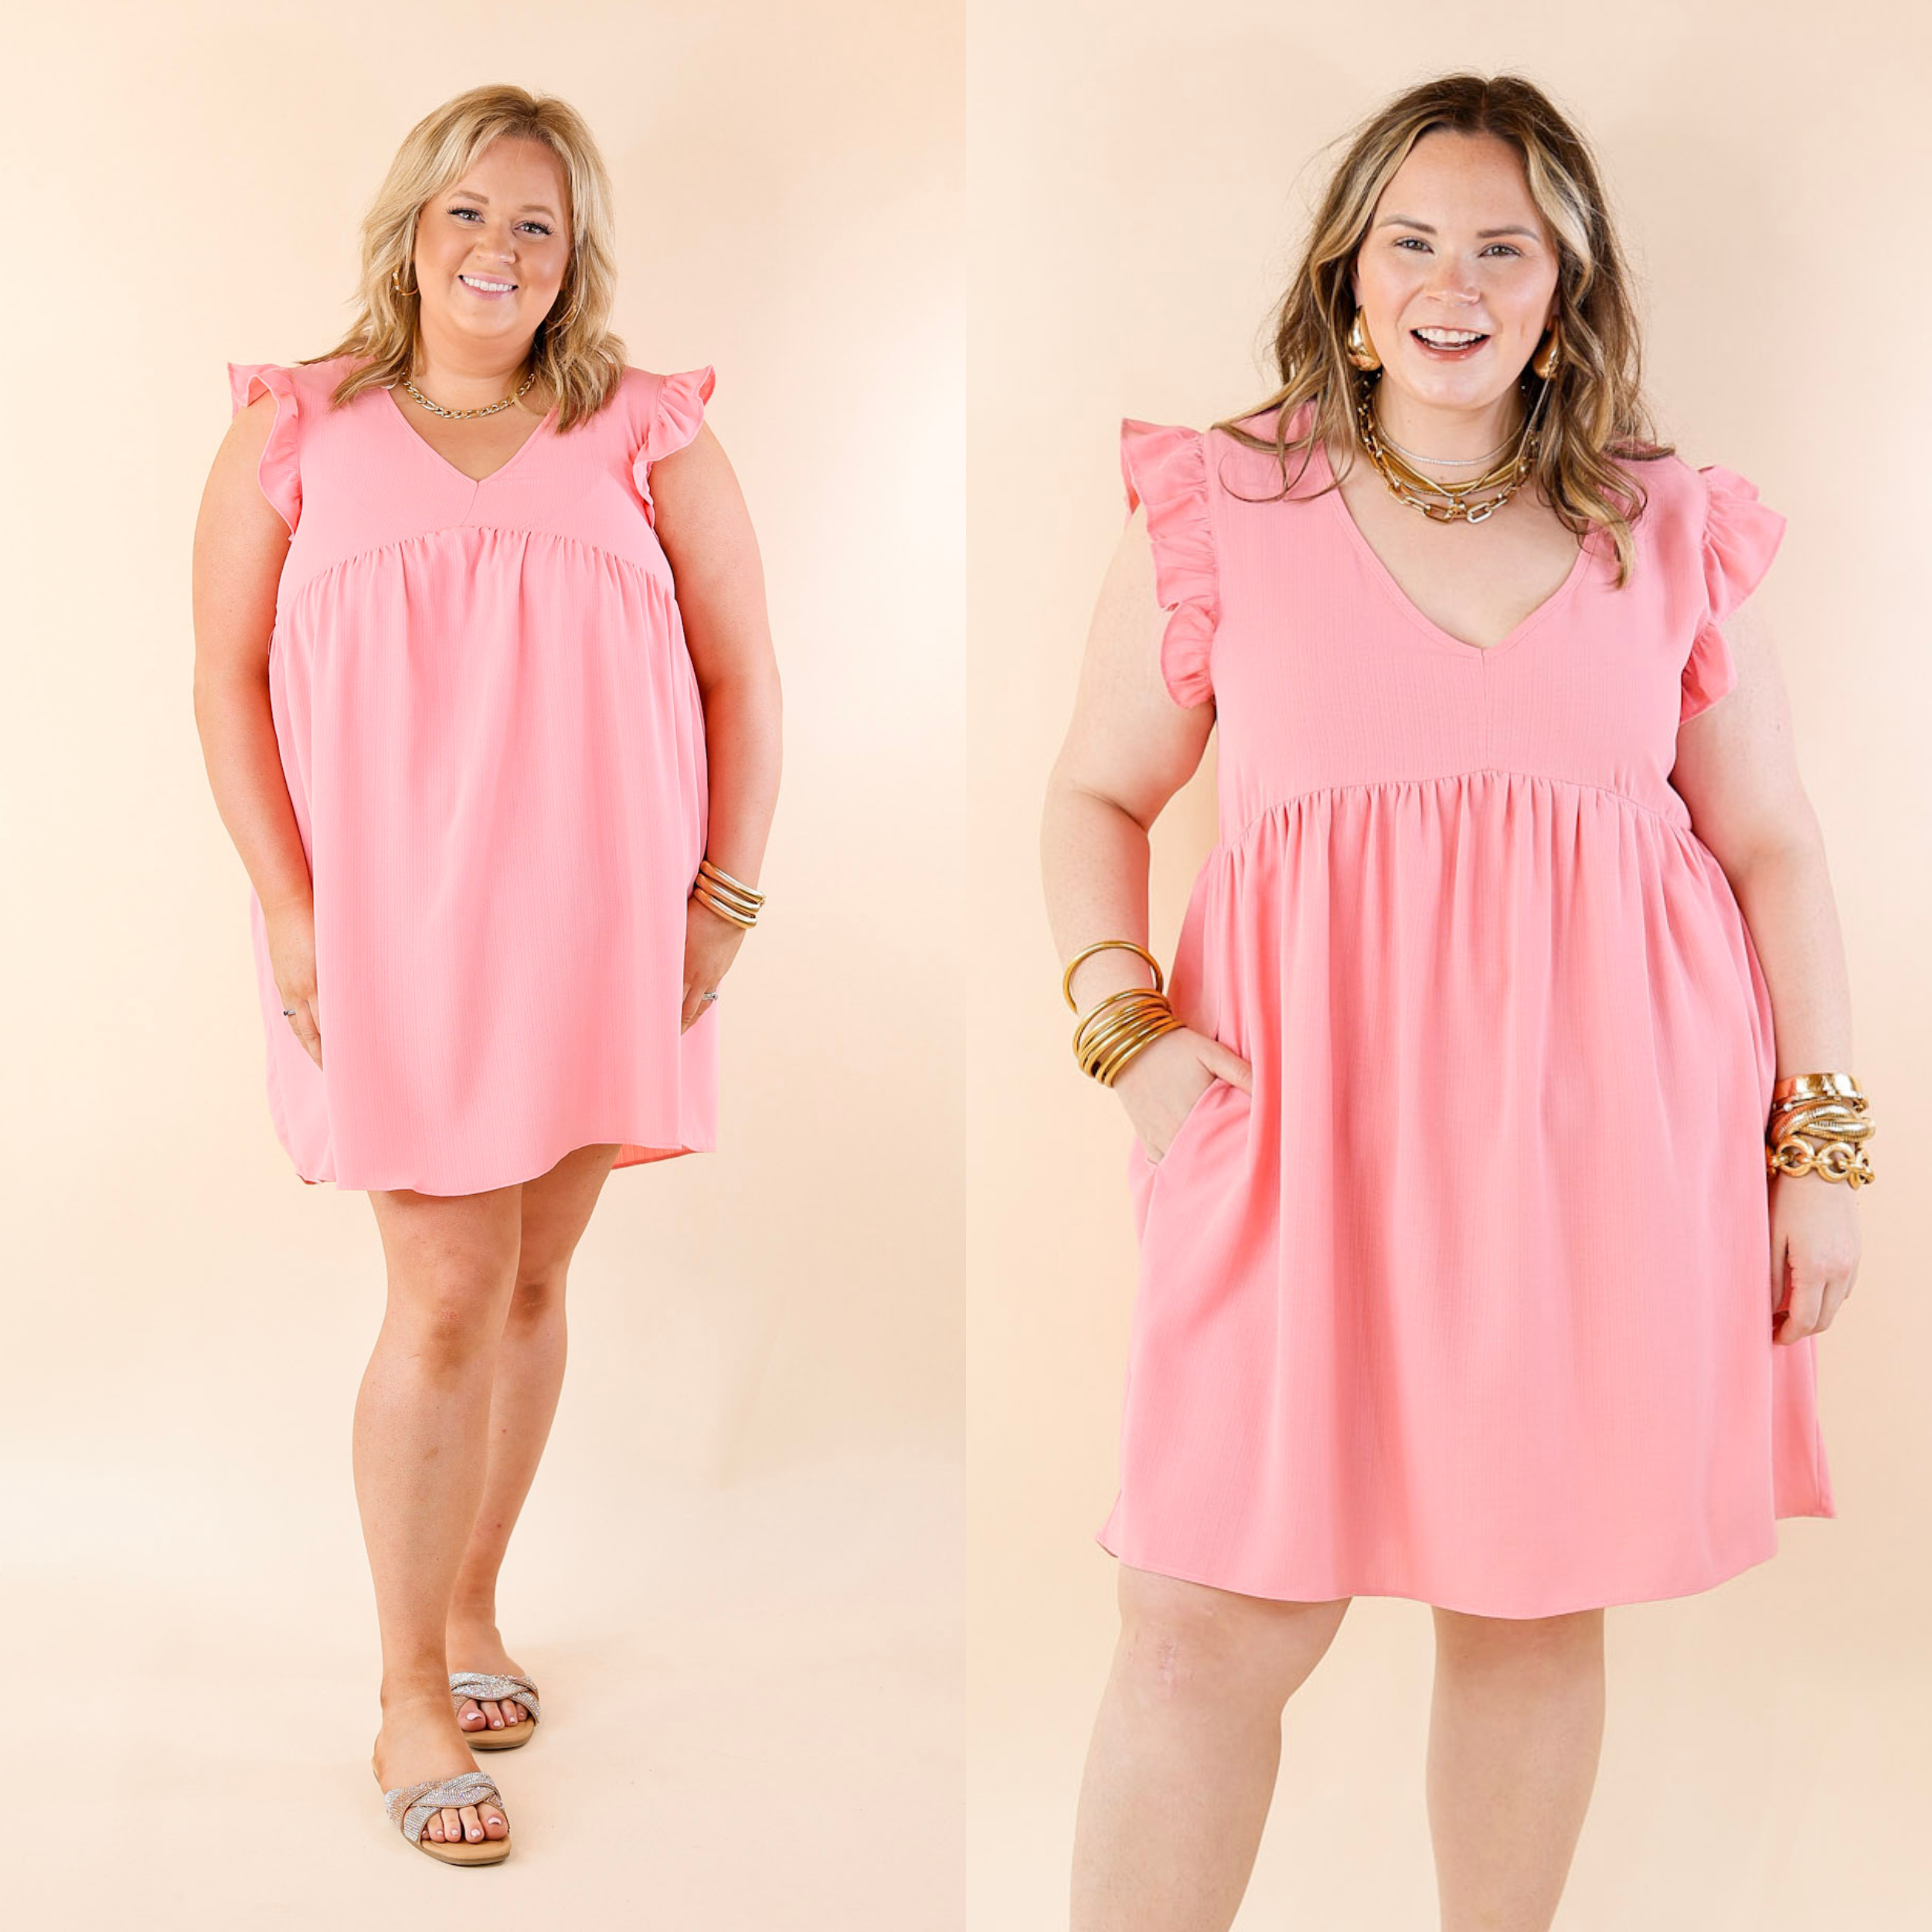 Capture Your Attention V Neck Dress with Ruffle Cap Sleeves in Bubblegum Pink - Giddy Up Glamour Boutique